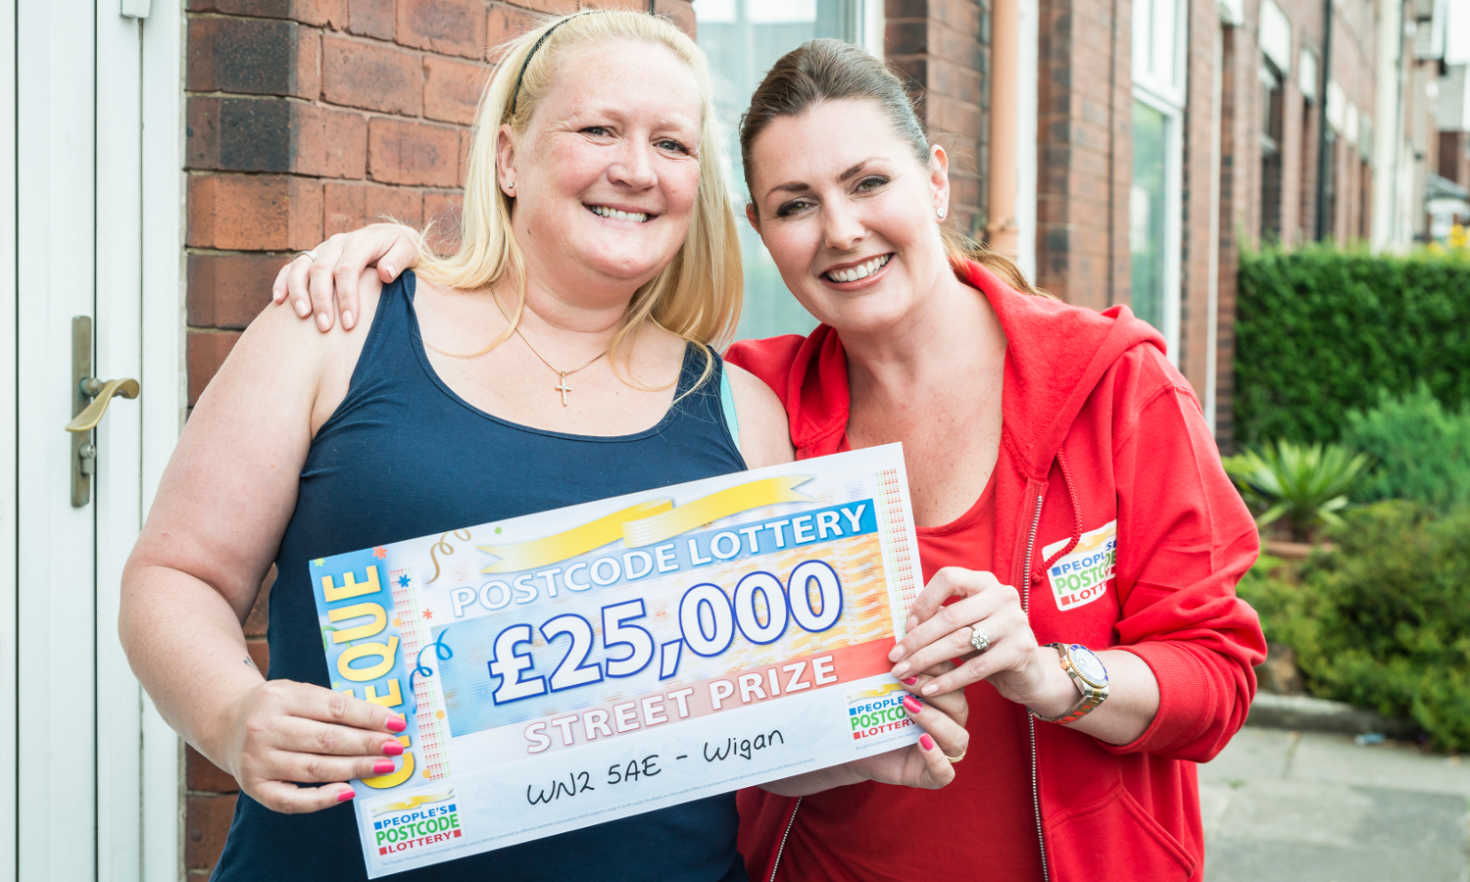 Wigan player Kerry Brown was stunned to win £25,000 this weekend